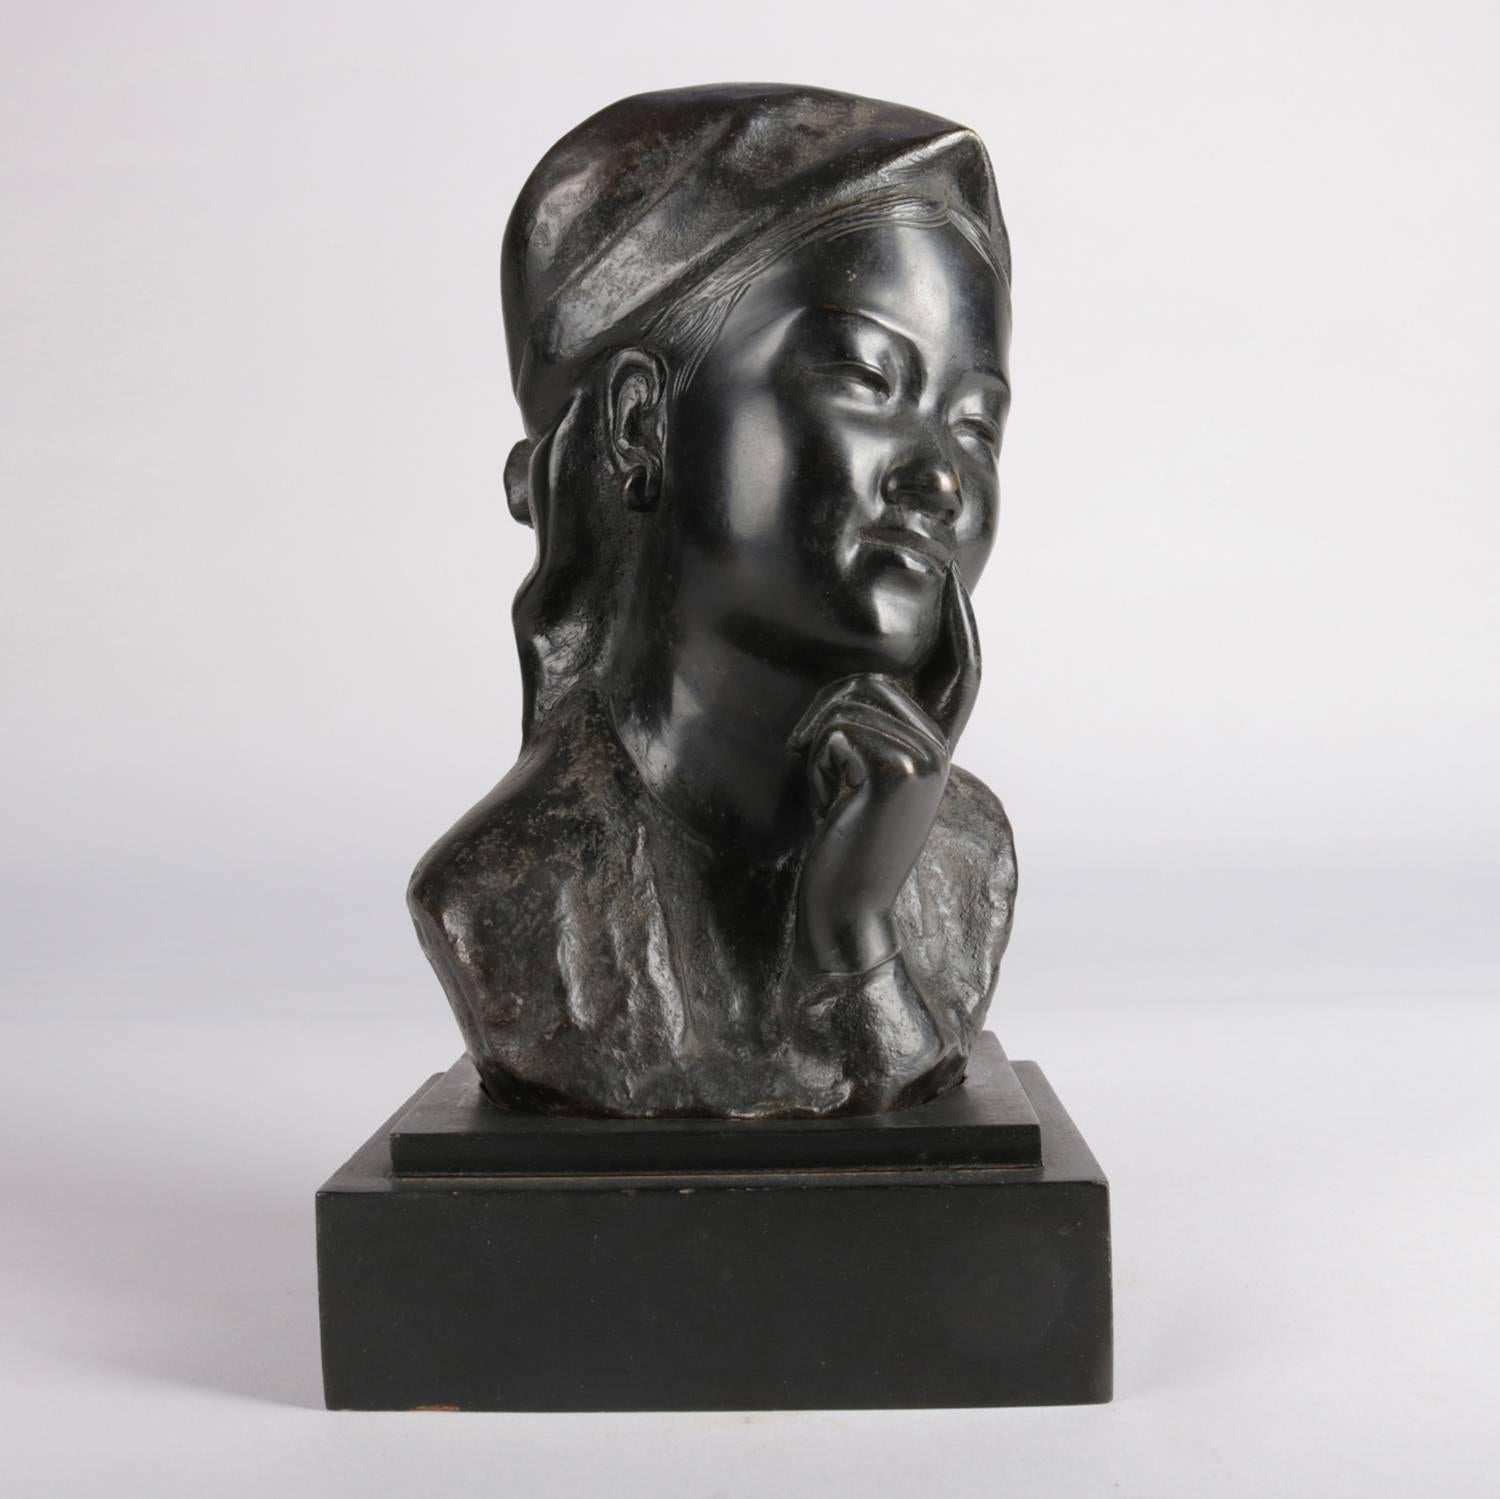 Japanese cast bronze portrait bust sculpture features pensive young girl in traditional garb and with head covering or scarf, seated on ebonized wood base, 20th century

Measures: 10